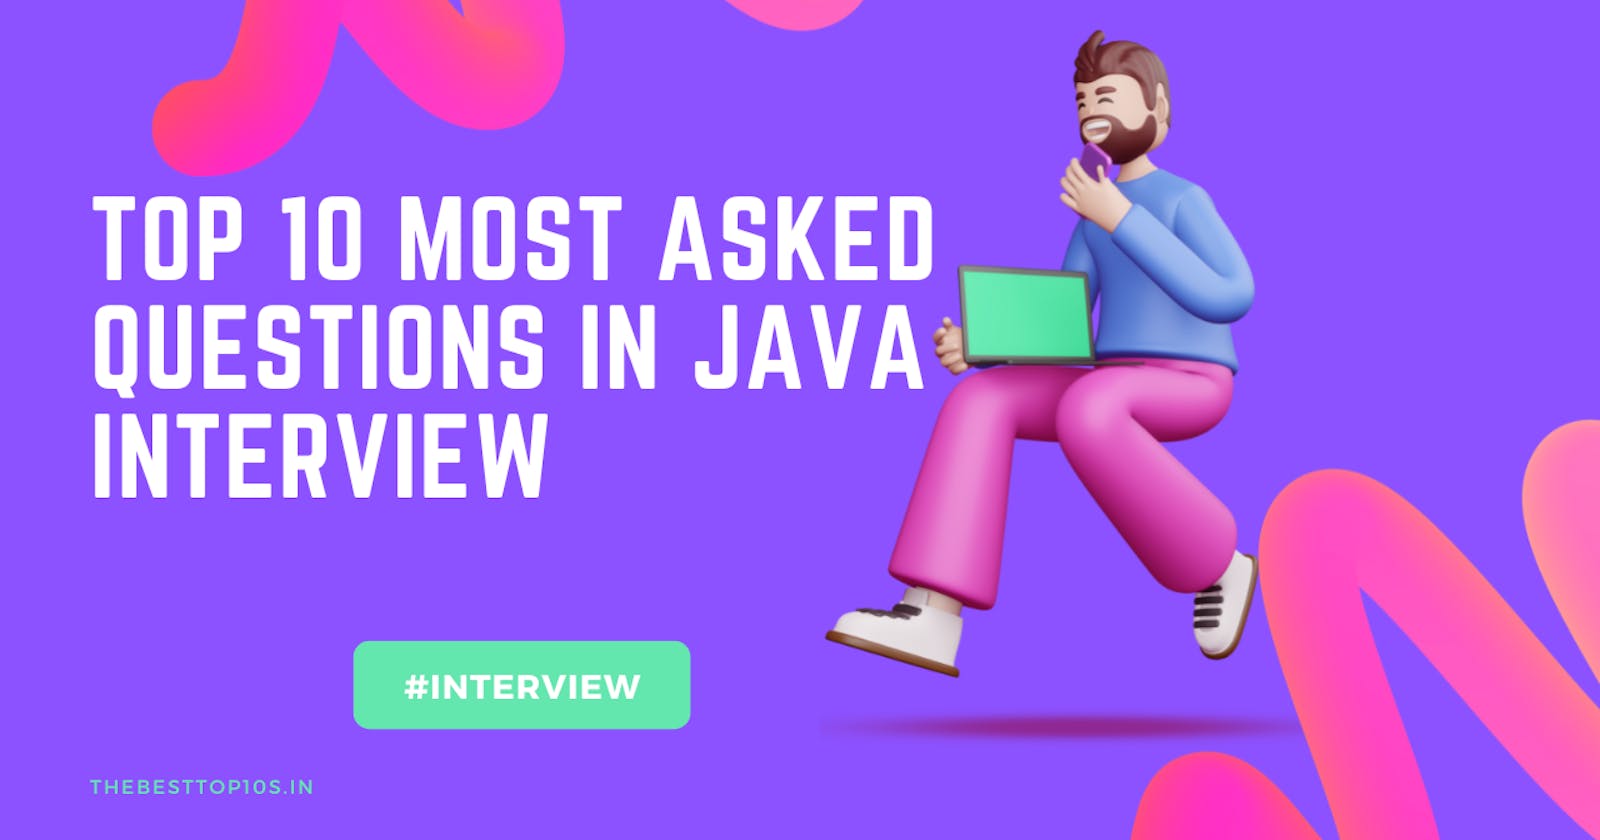 Most Asked Questions in JAVA interview